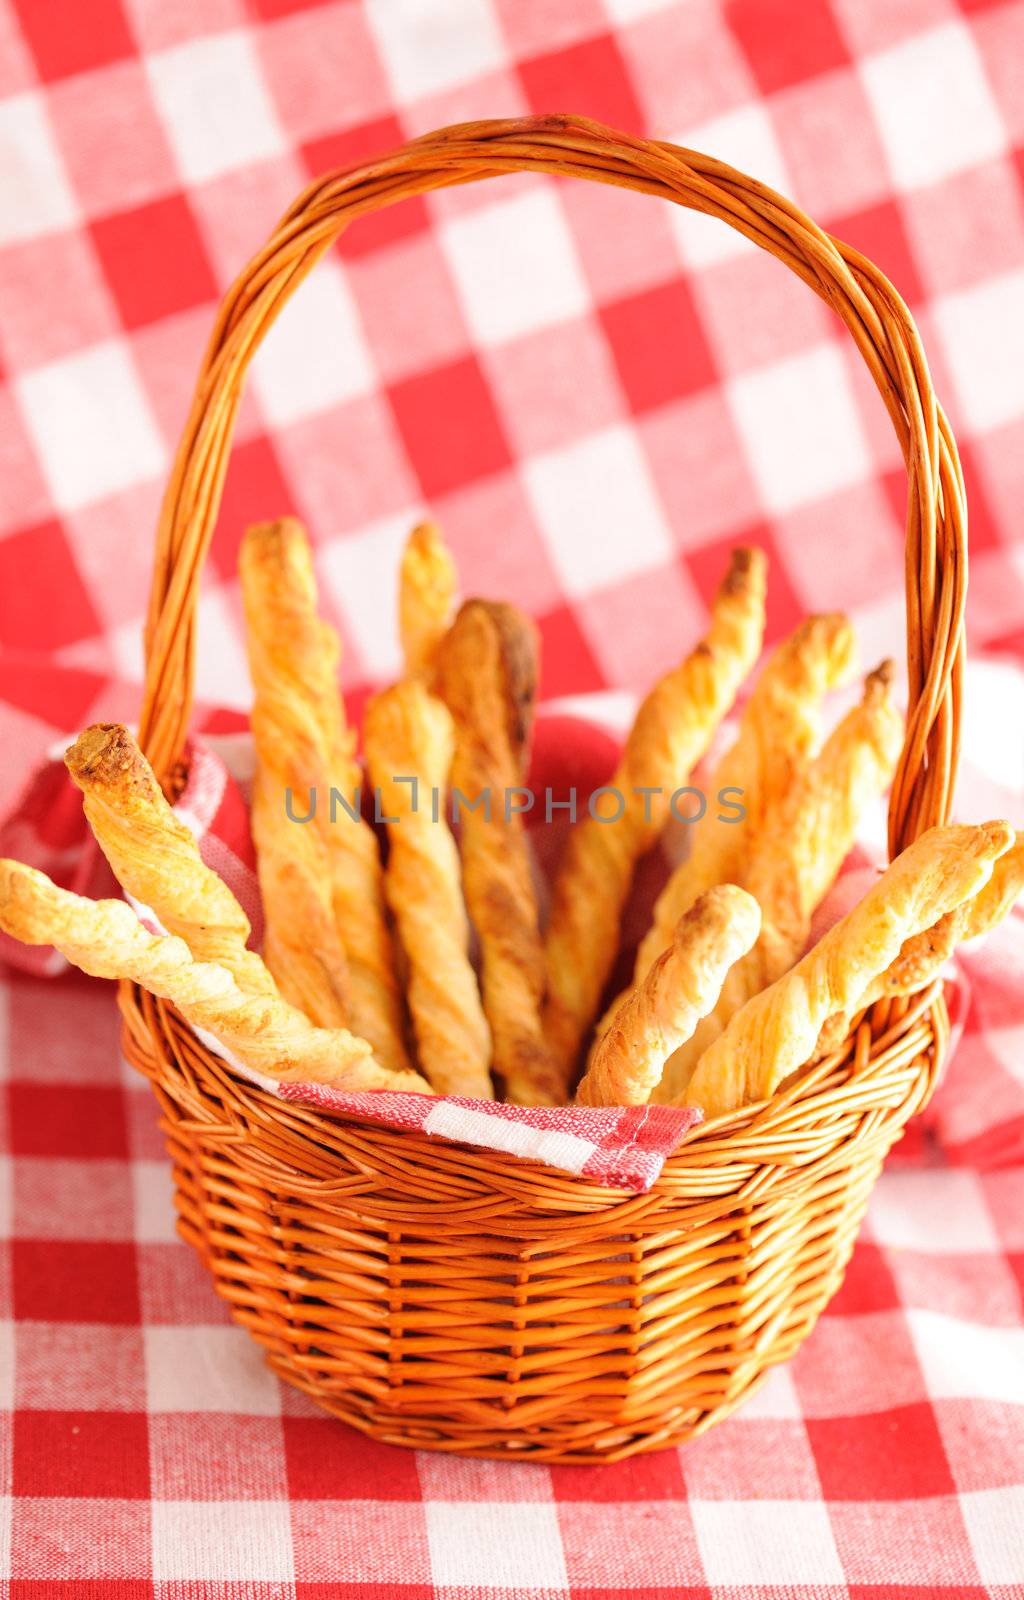 Cheese twists pastry by haveseen